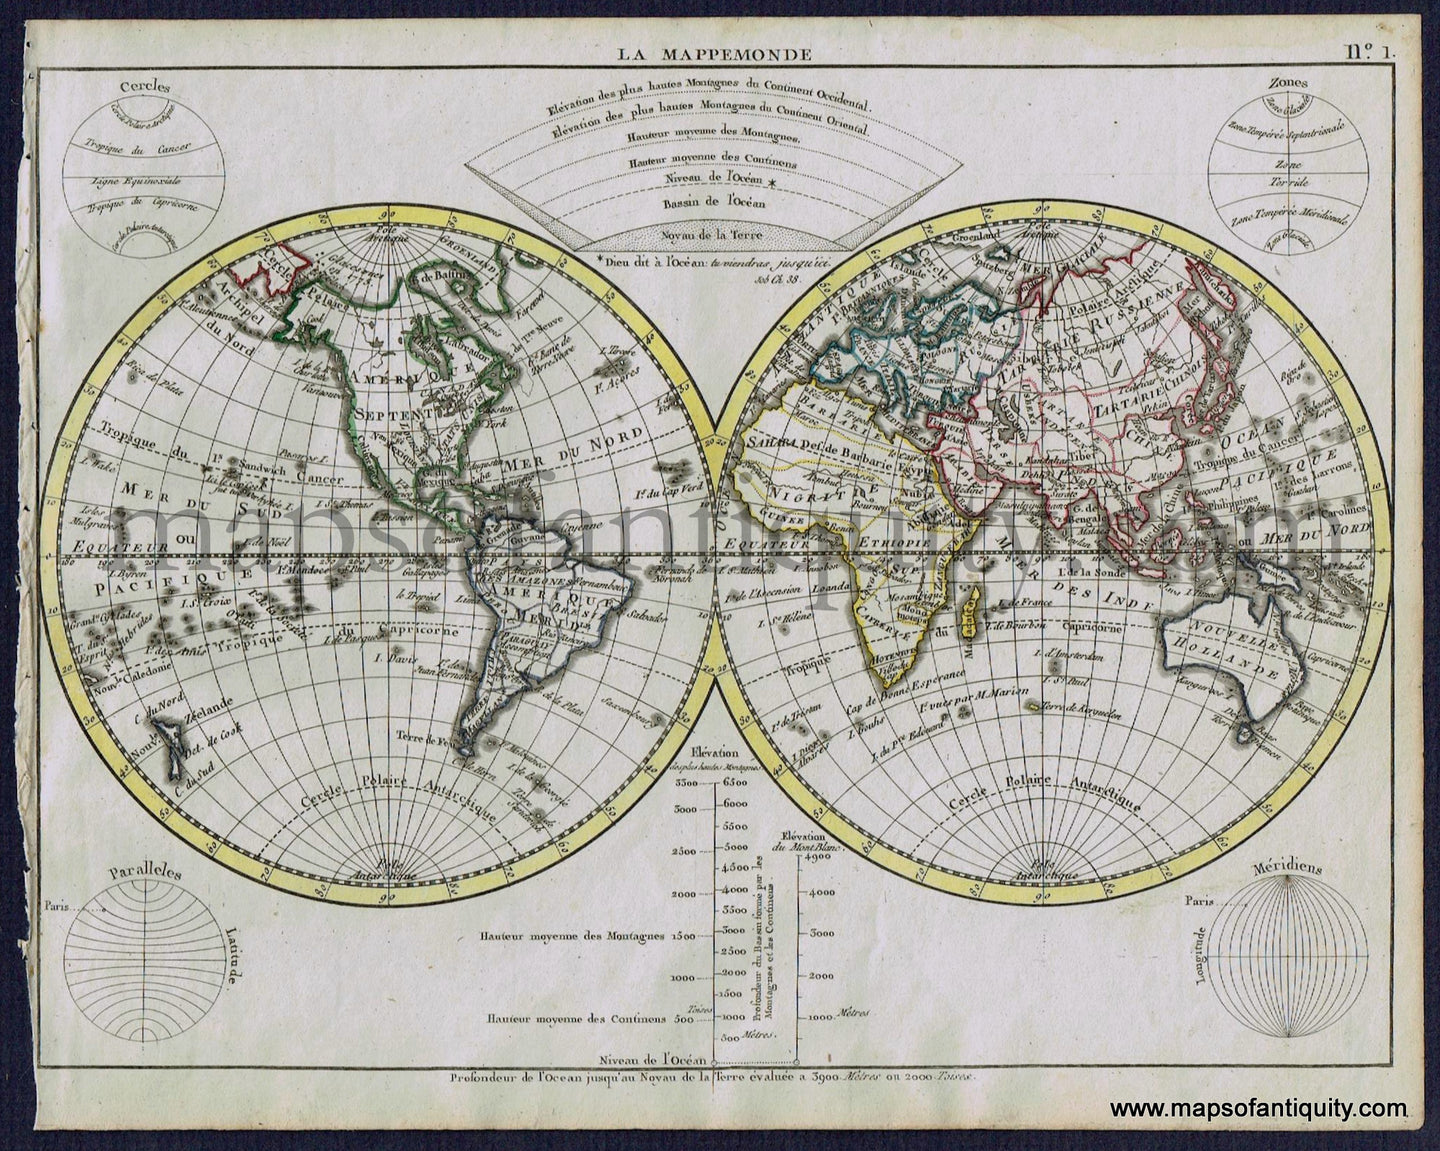 Antique-Map-La-Mappemonde-World-Herrison-French-1806-1800s-Early-19th-Century-Maps-of-Antiquity